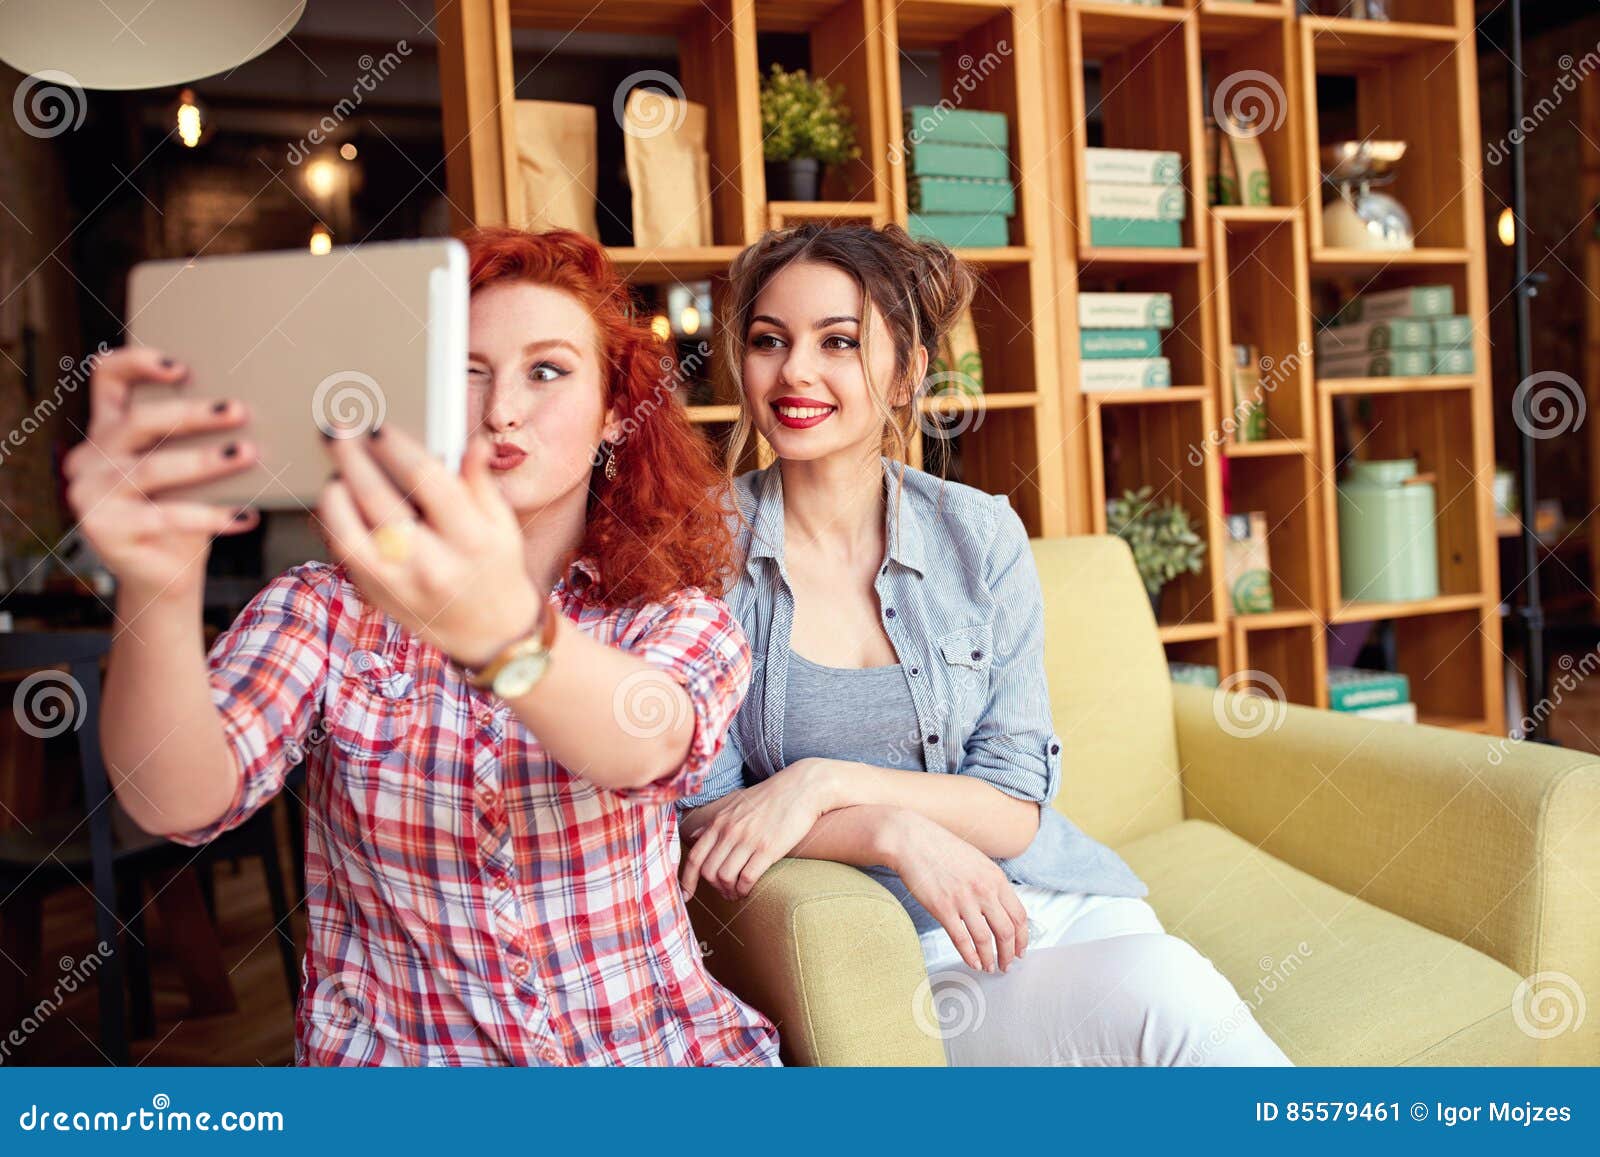 Two Women Making Funny Selfie Stock Image - Image of lifestyle ...